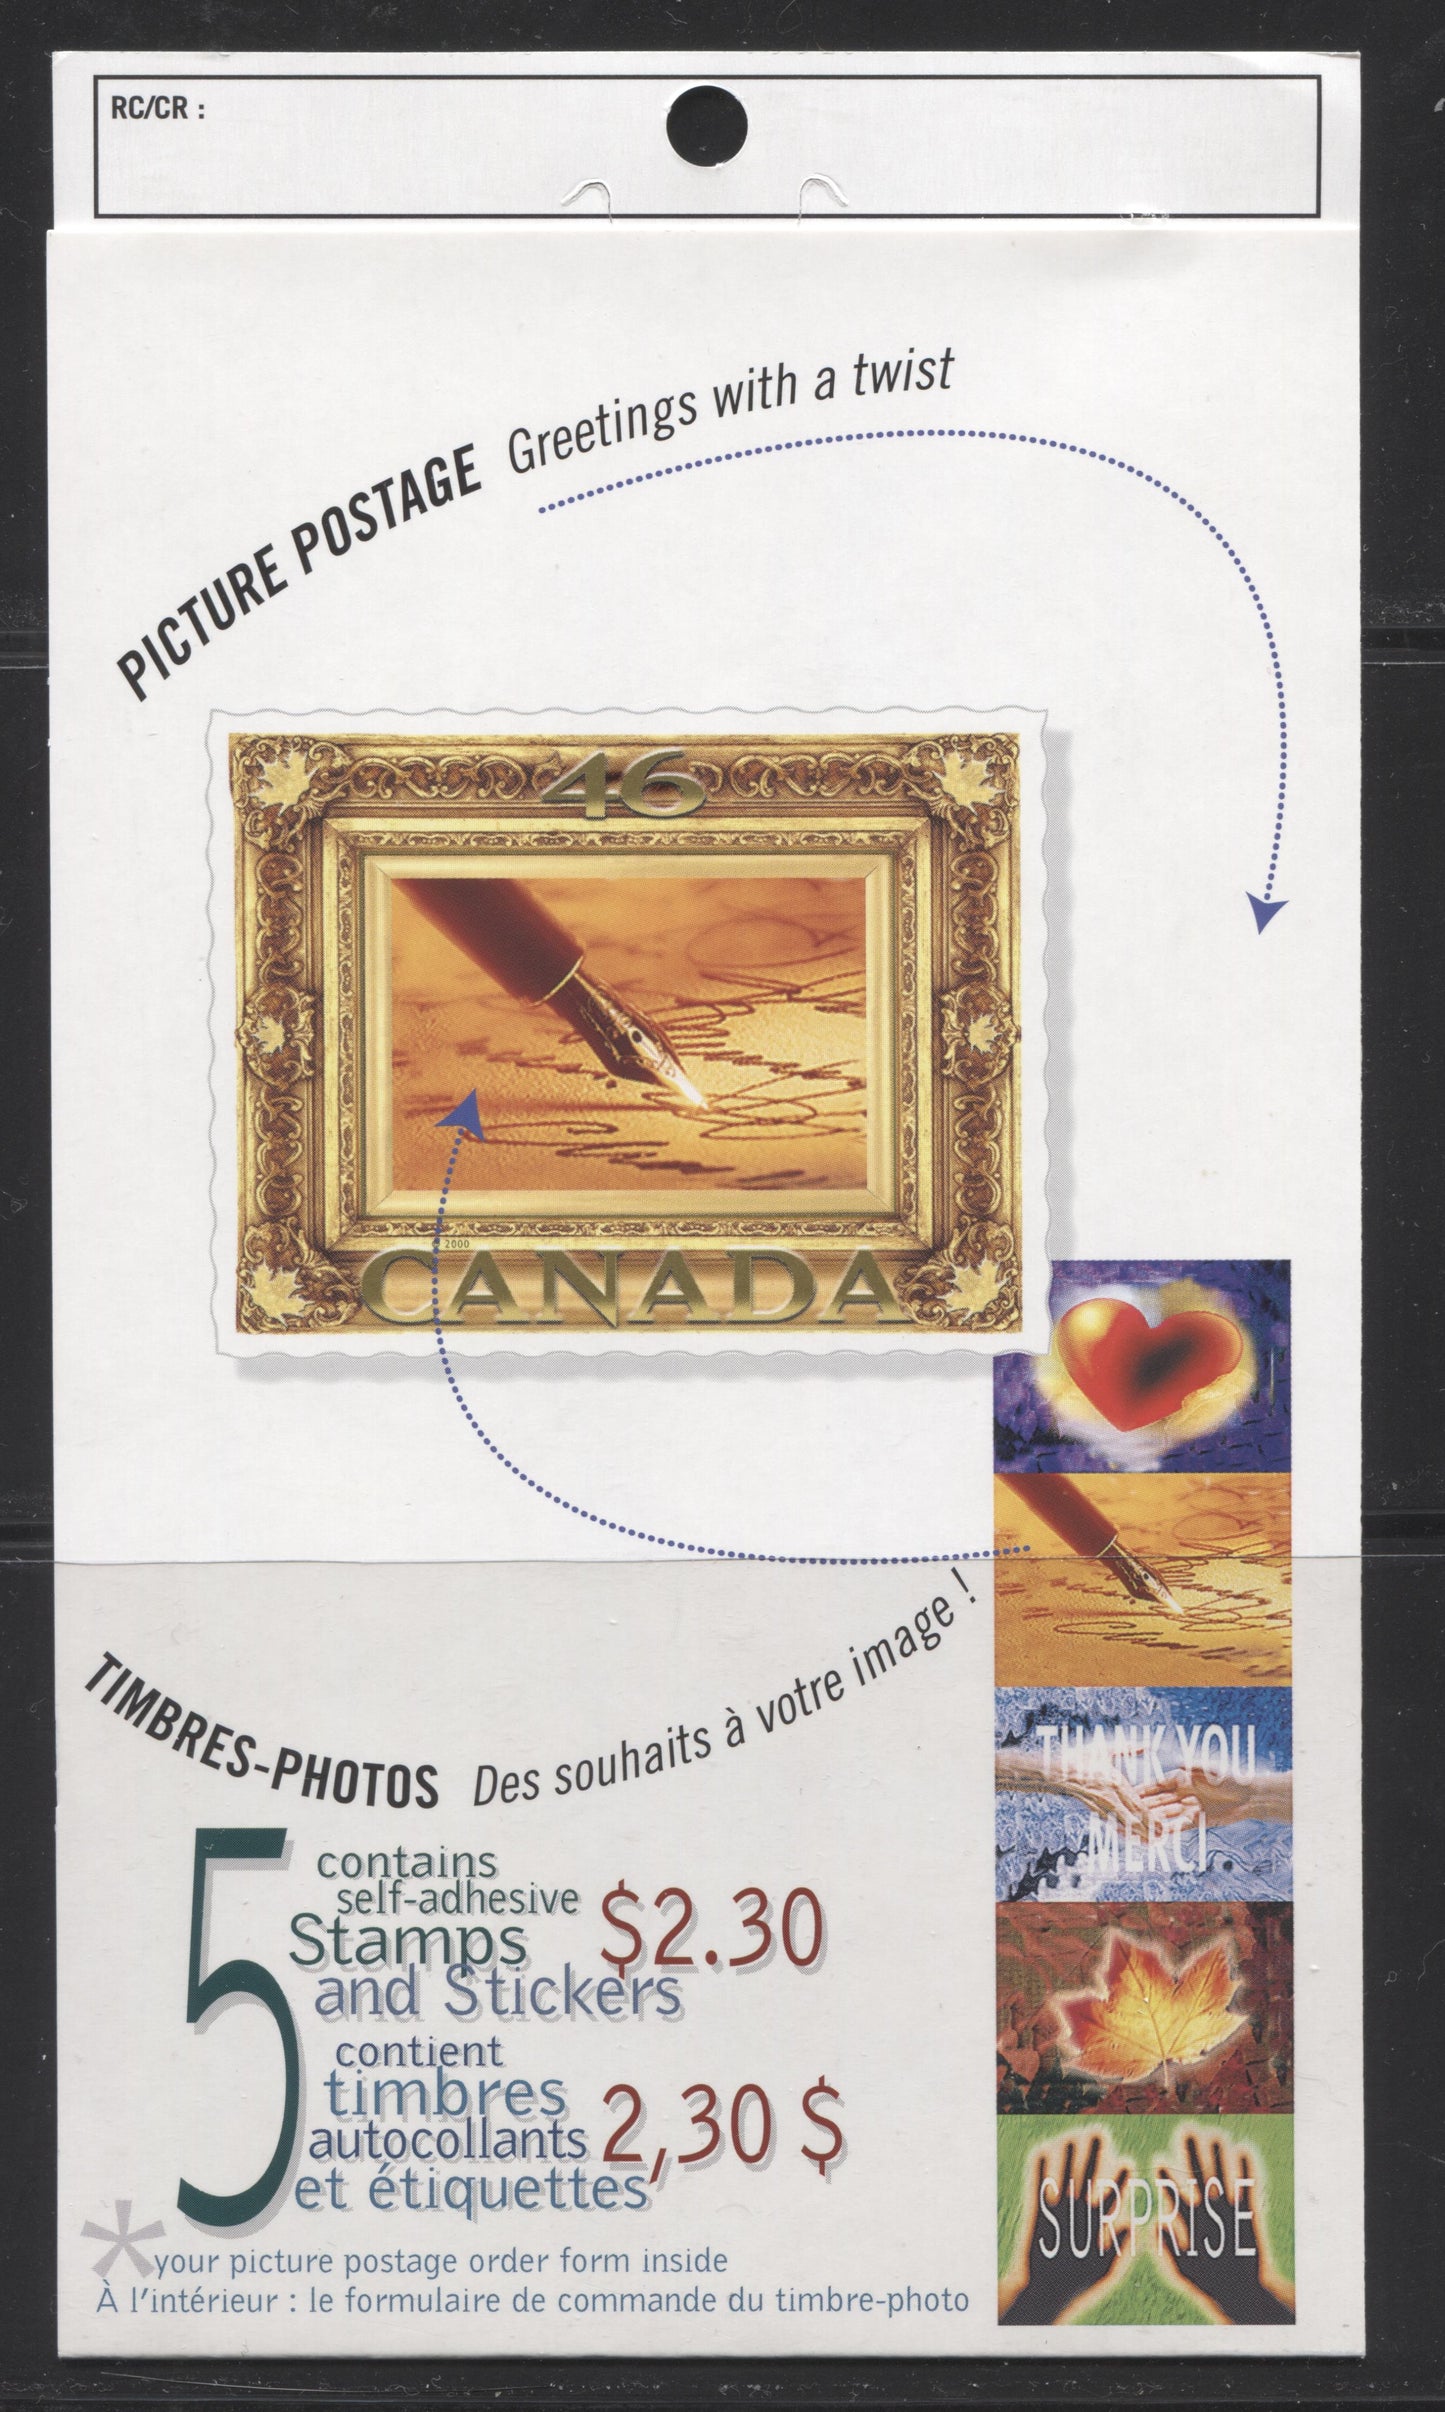 Canada #BK227a-b 2000 Picture Postage Issue, Complete $2.30 Booklet, JAC Paper, Dead Paper, 4 mm GT-4 Tagging Brixton Chrome 